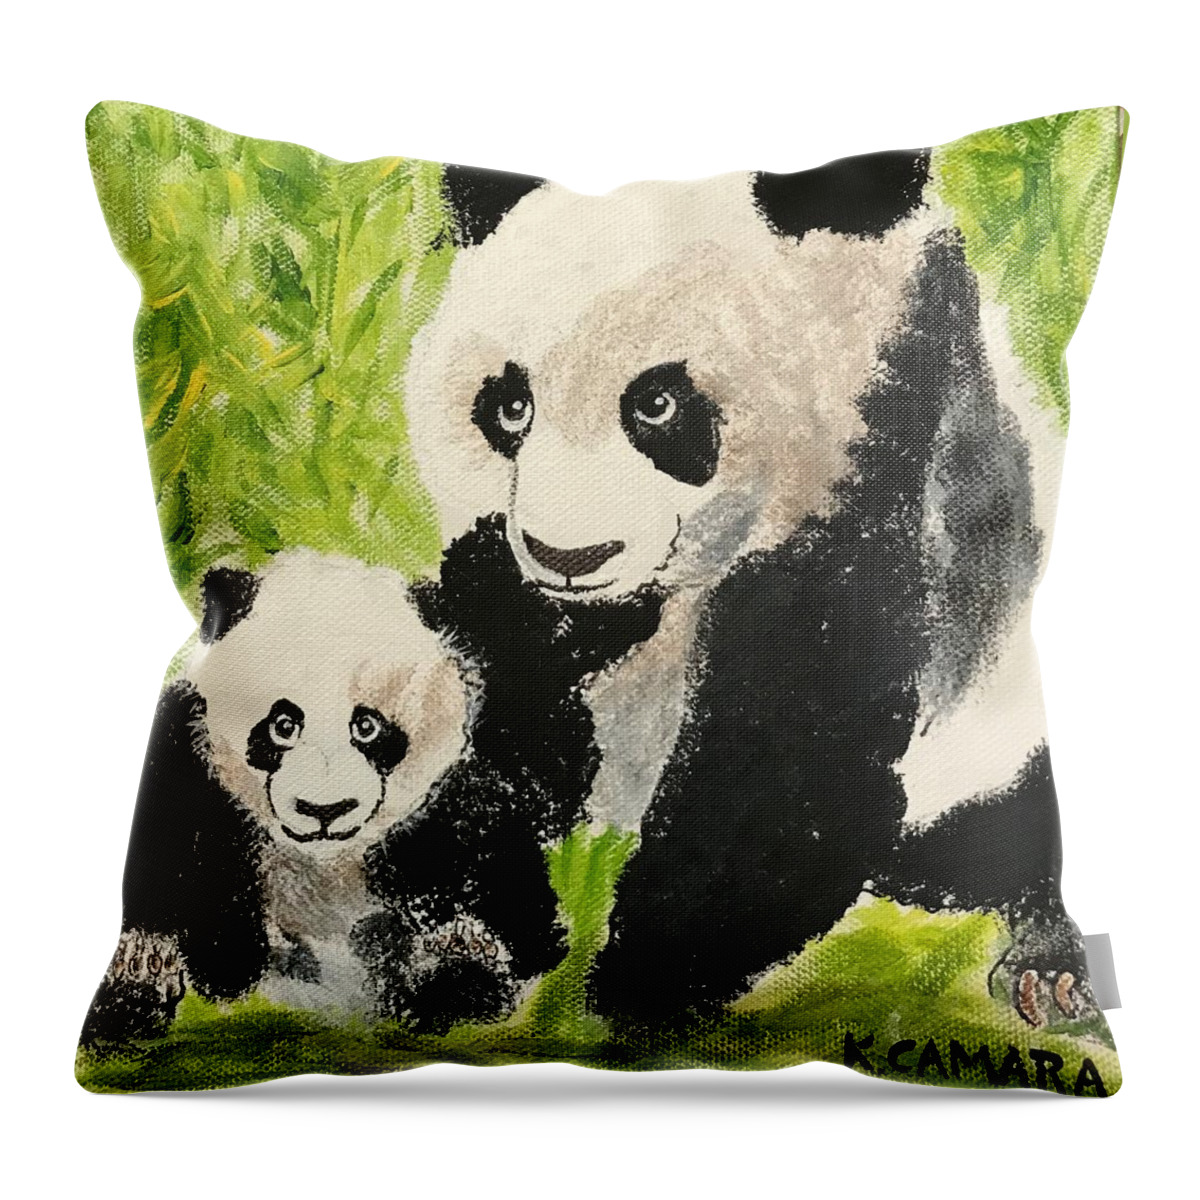 Pets Throw Pillow featuring the painting Pandas by Kathie Camara